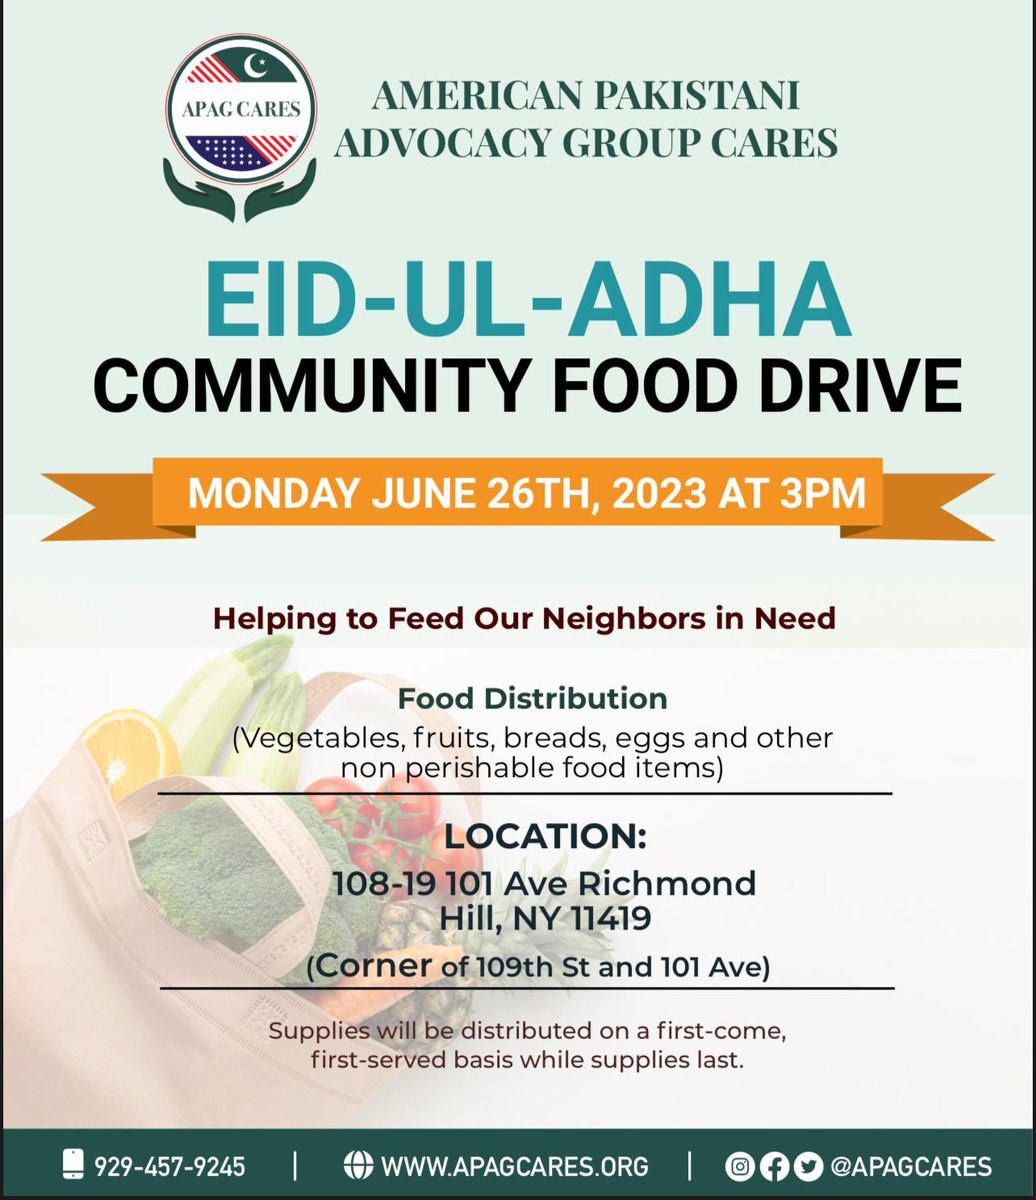 APAG Cares Eid Ul Adha Community Food Drive will be held on Monday, June 26th, 2023 at 3pm. With the goal of helping to feed our neighbors in need. It’s all about giving back and serving the community. 

#APAGCares #communitywork #eid #eiduladha #richmondhill #queens #volunteer